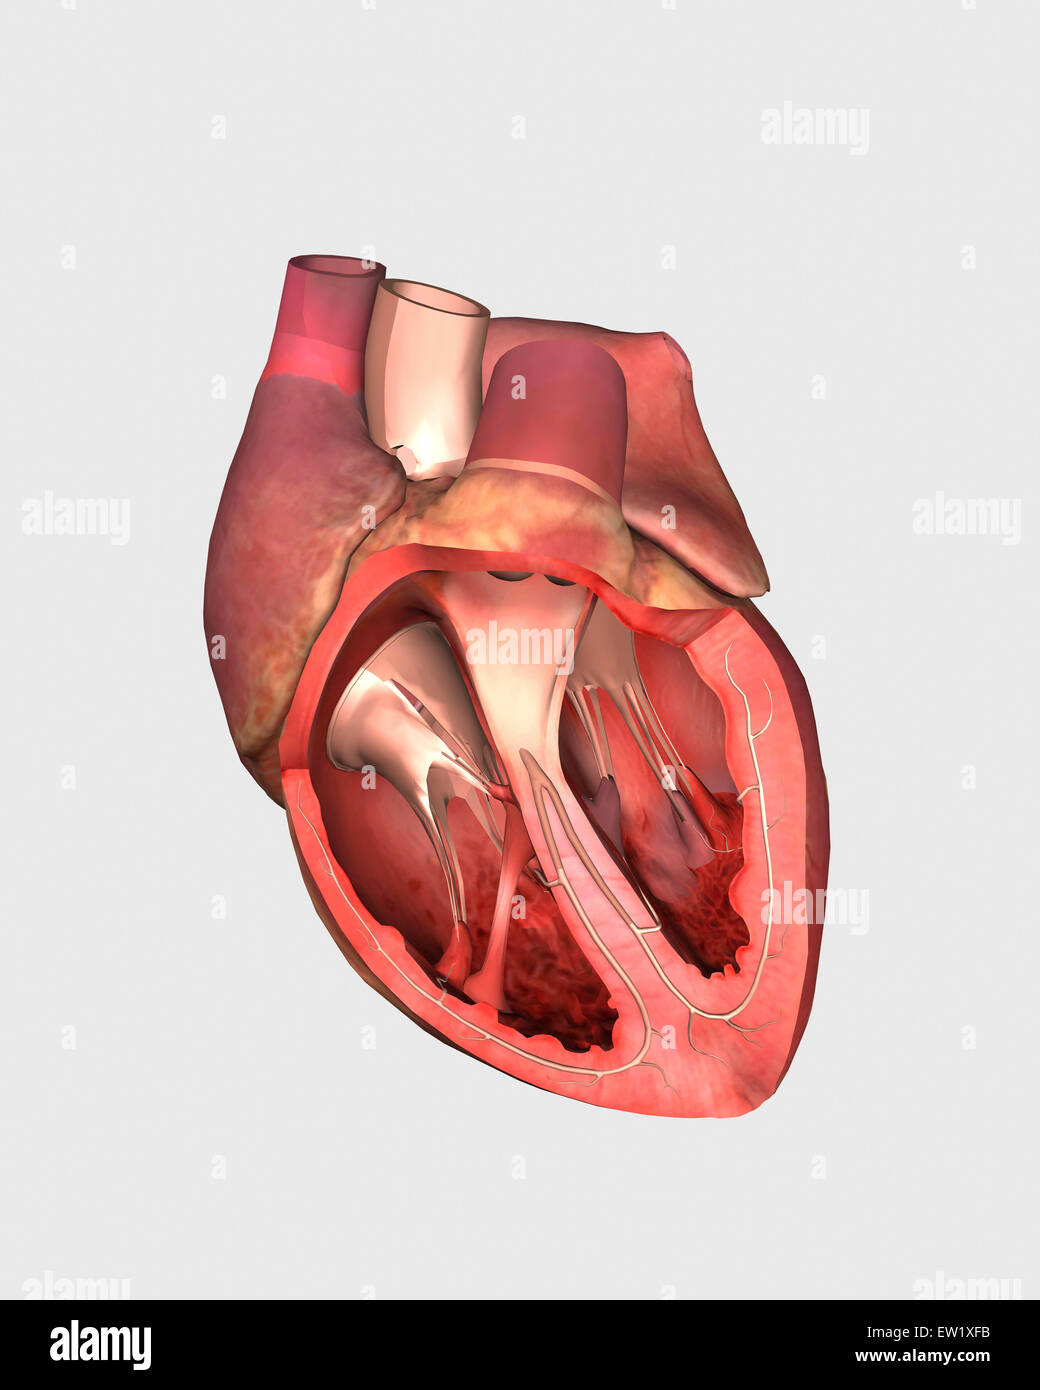 Heart valves showing pulmonary valve, mitral valve and tricuspid. Stock Photo